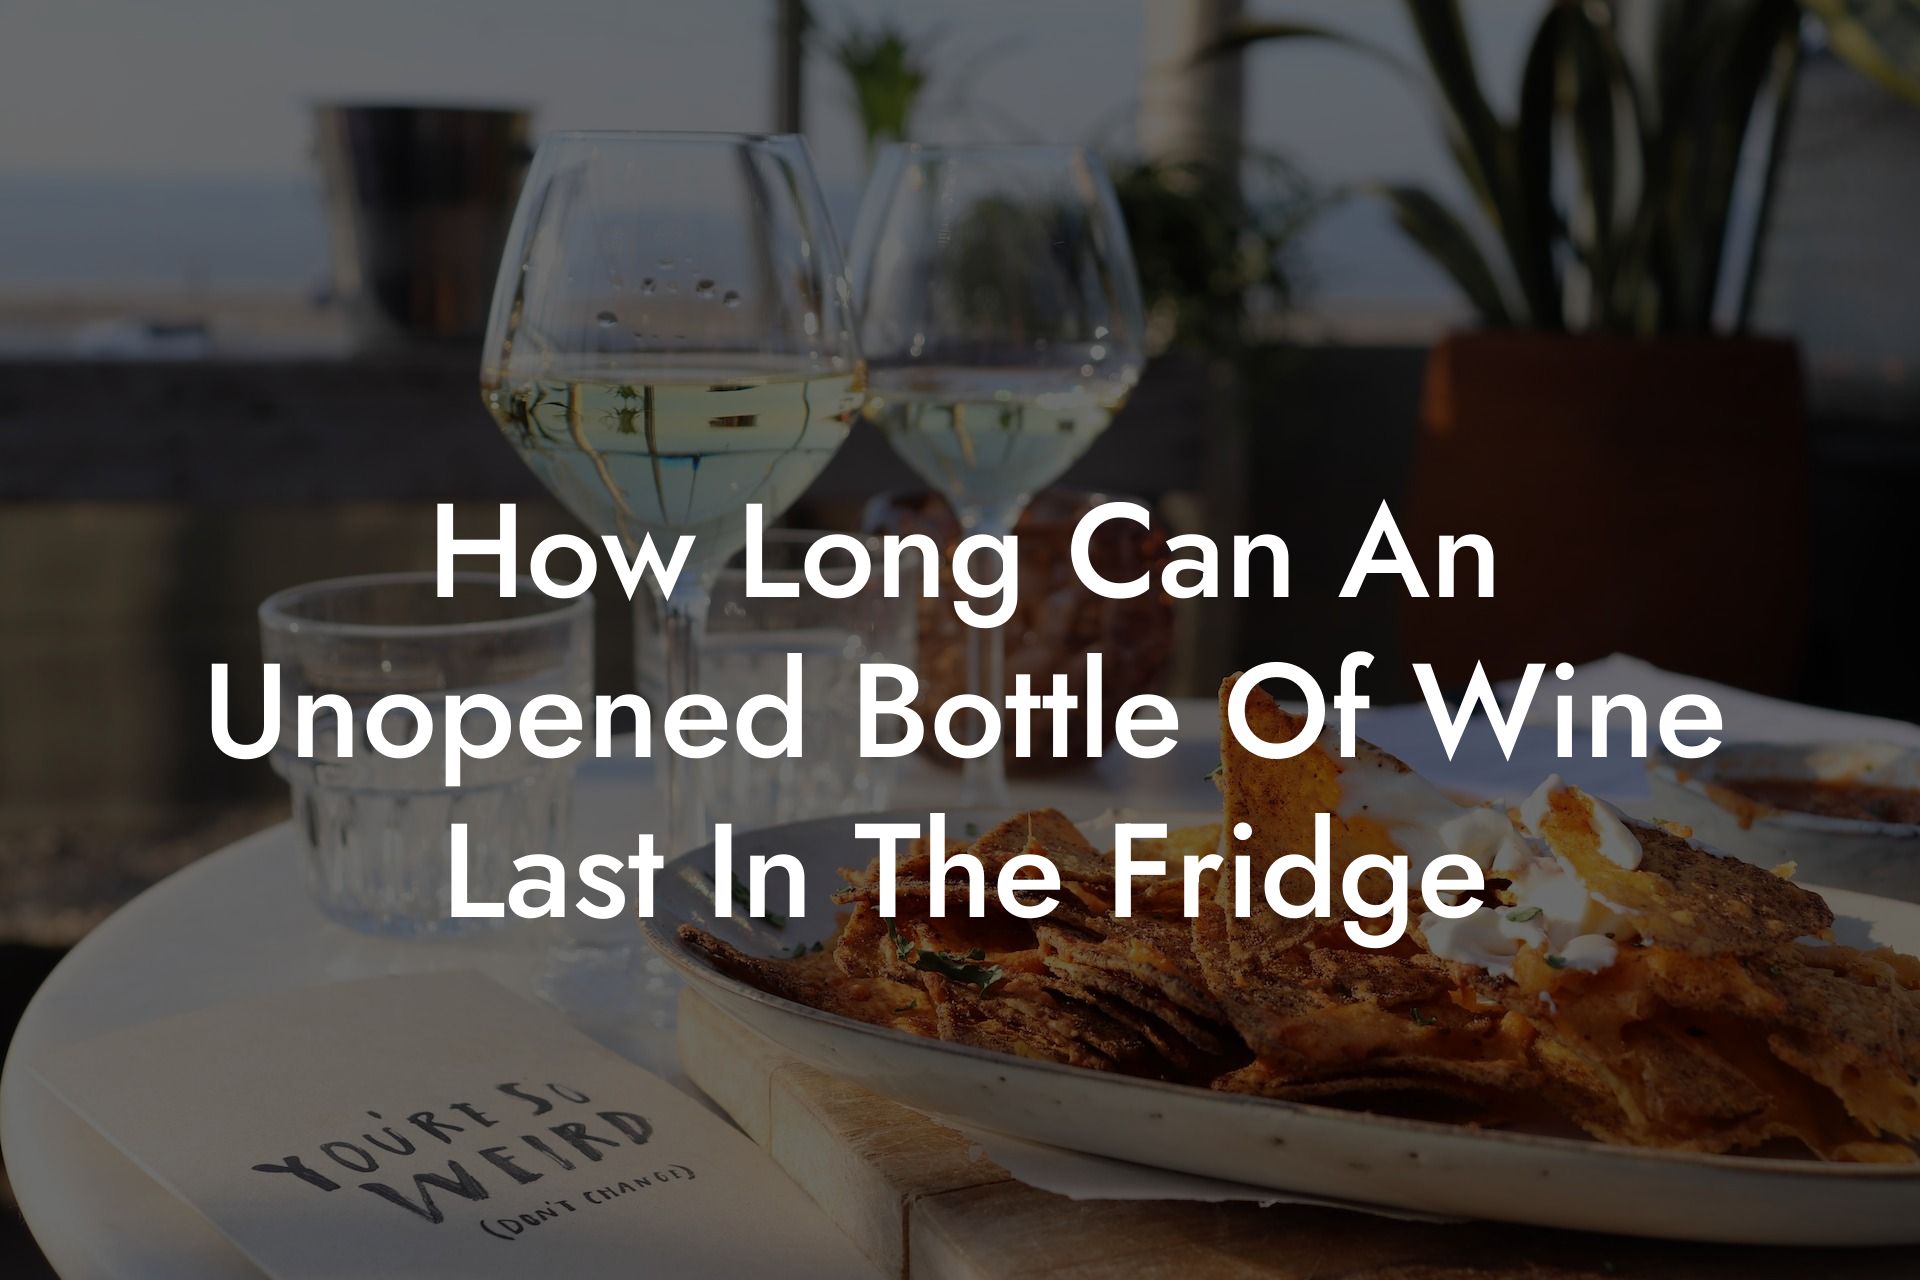 How Long Can An Unopened Bottle Of Wine Last In The Fridge